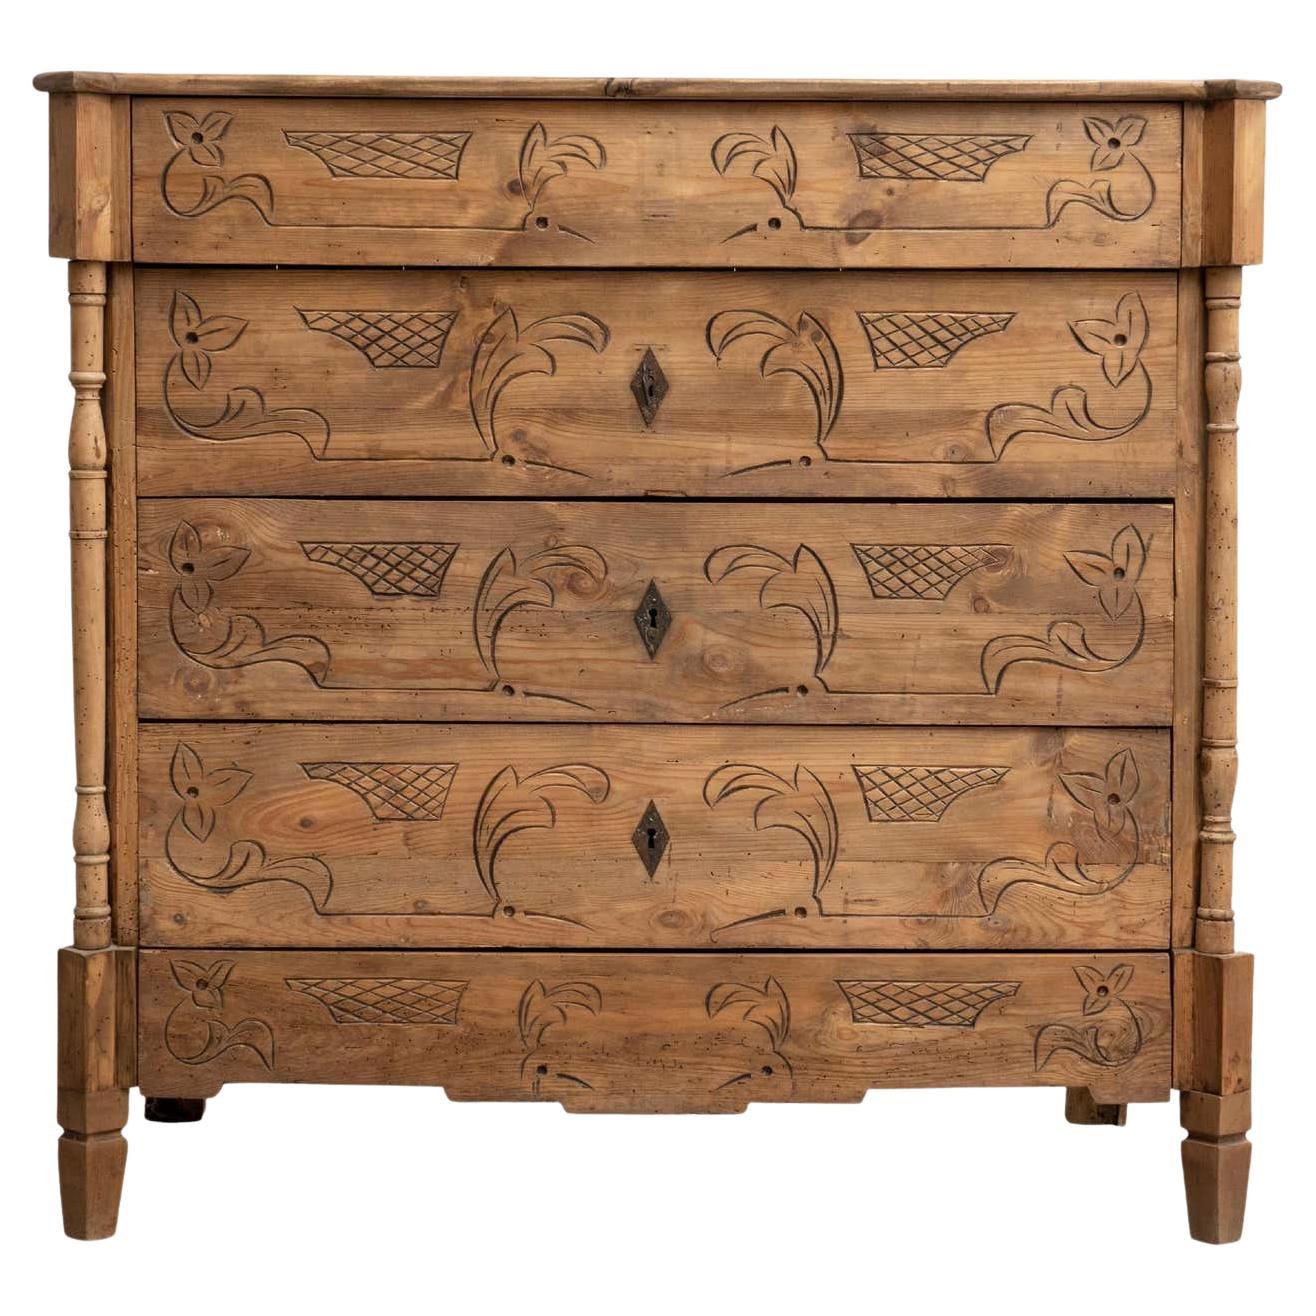 Early 20th Century Antique Traditional Spanish Pine Wood Dresser For Sale